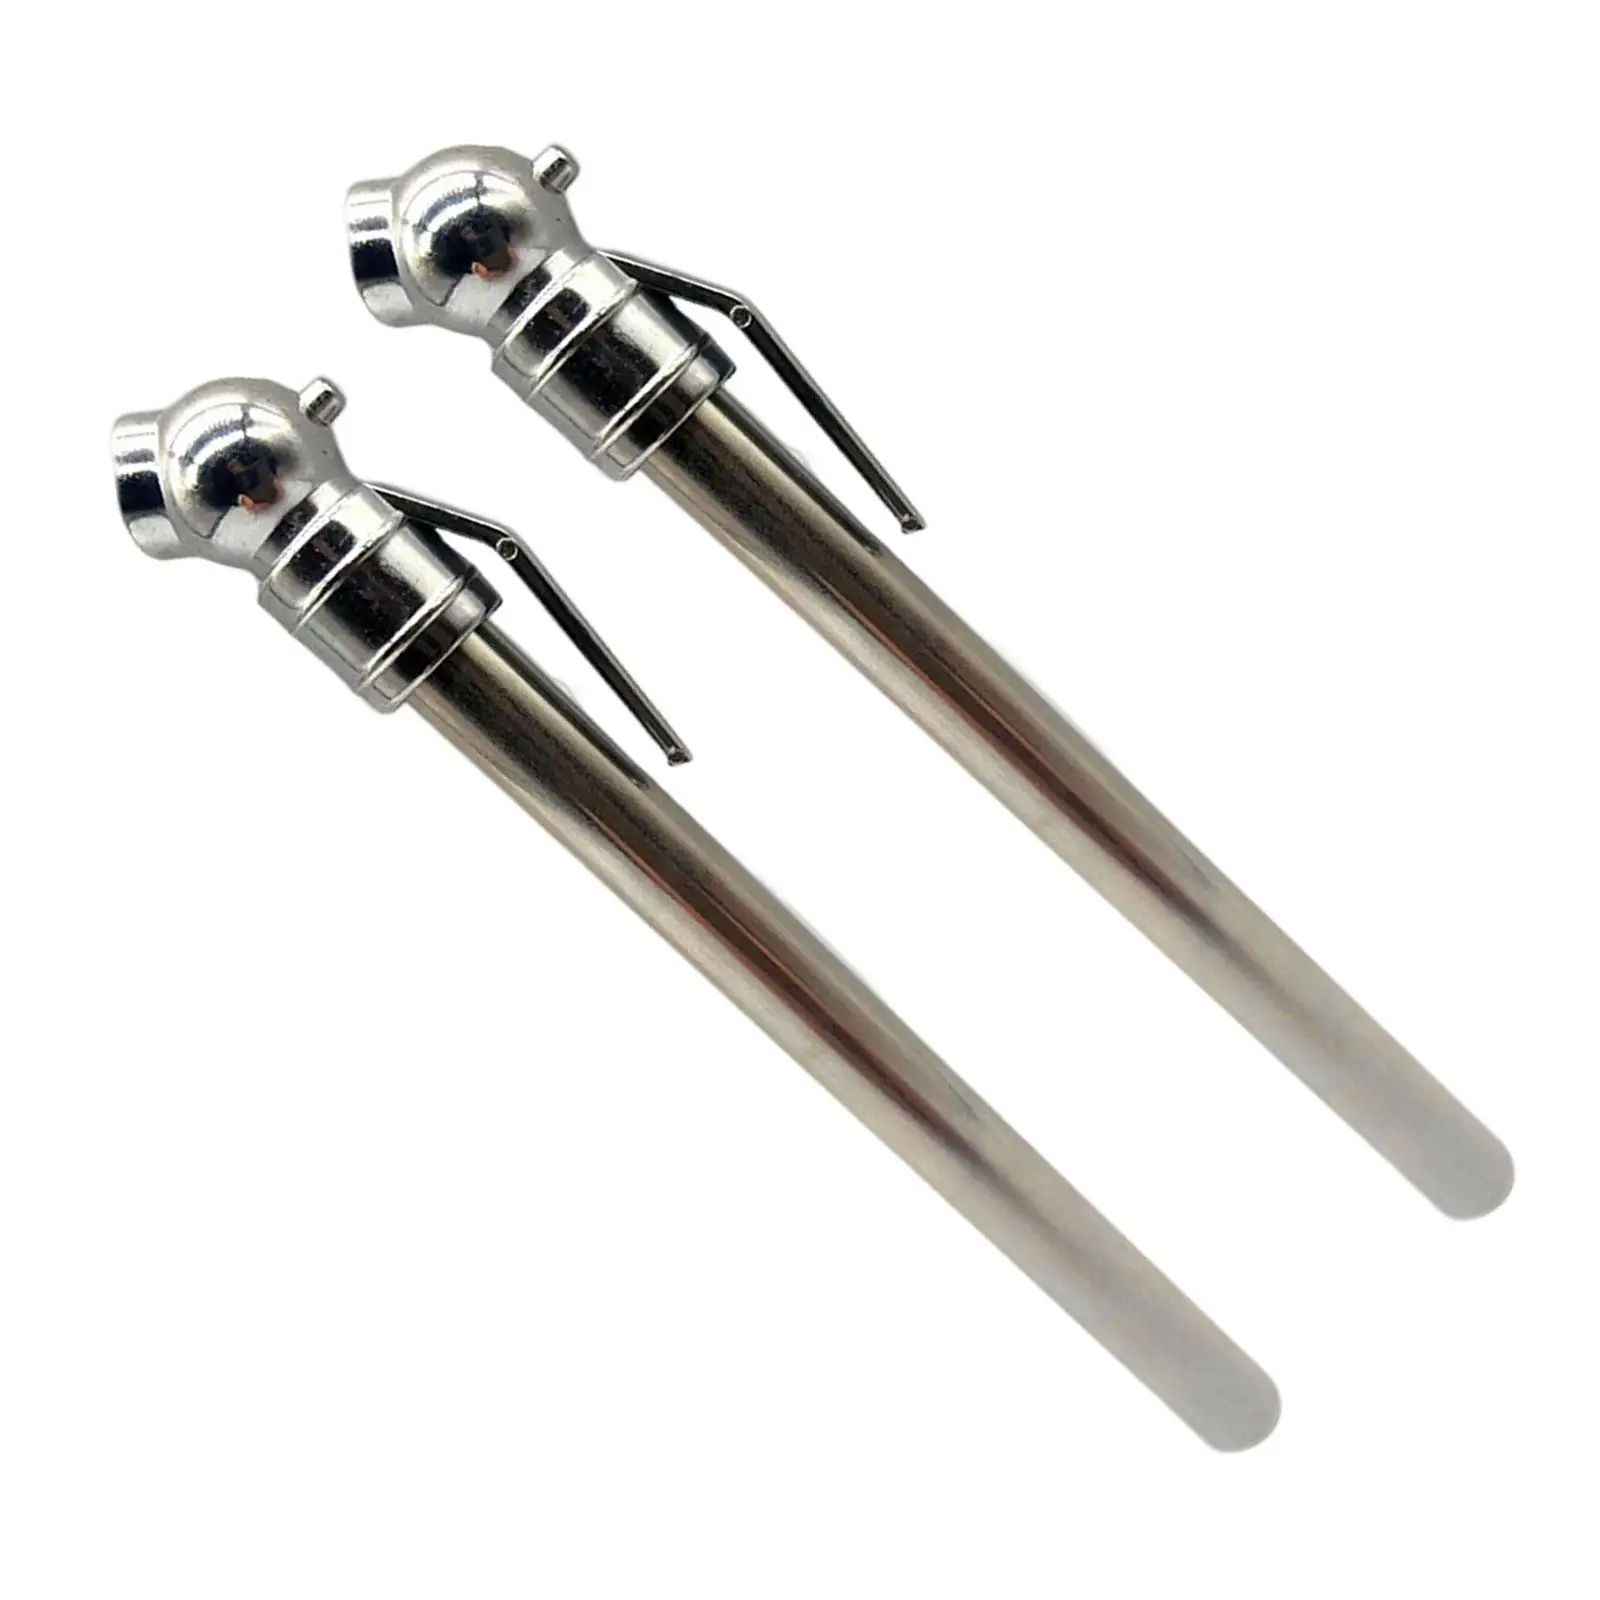 2 Pieces Pencil Tire Pressure Gauge Heavy Duty Chrome Metal Head Stainless Steel Body for Cars Rvs Trucks Vehicles Motorcycles